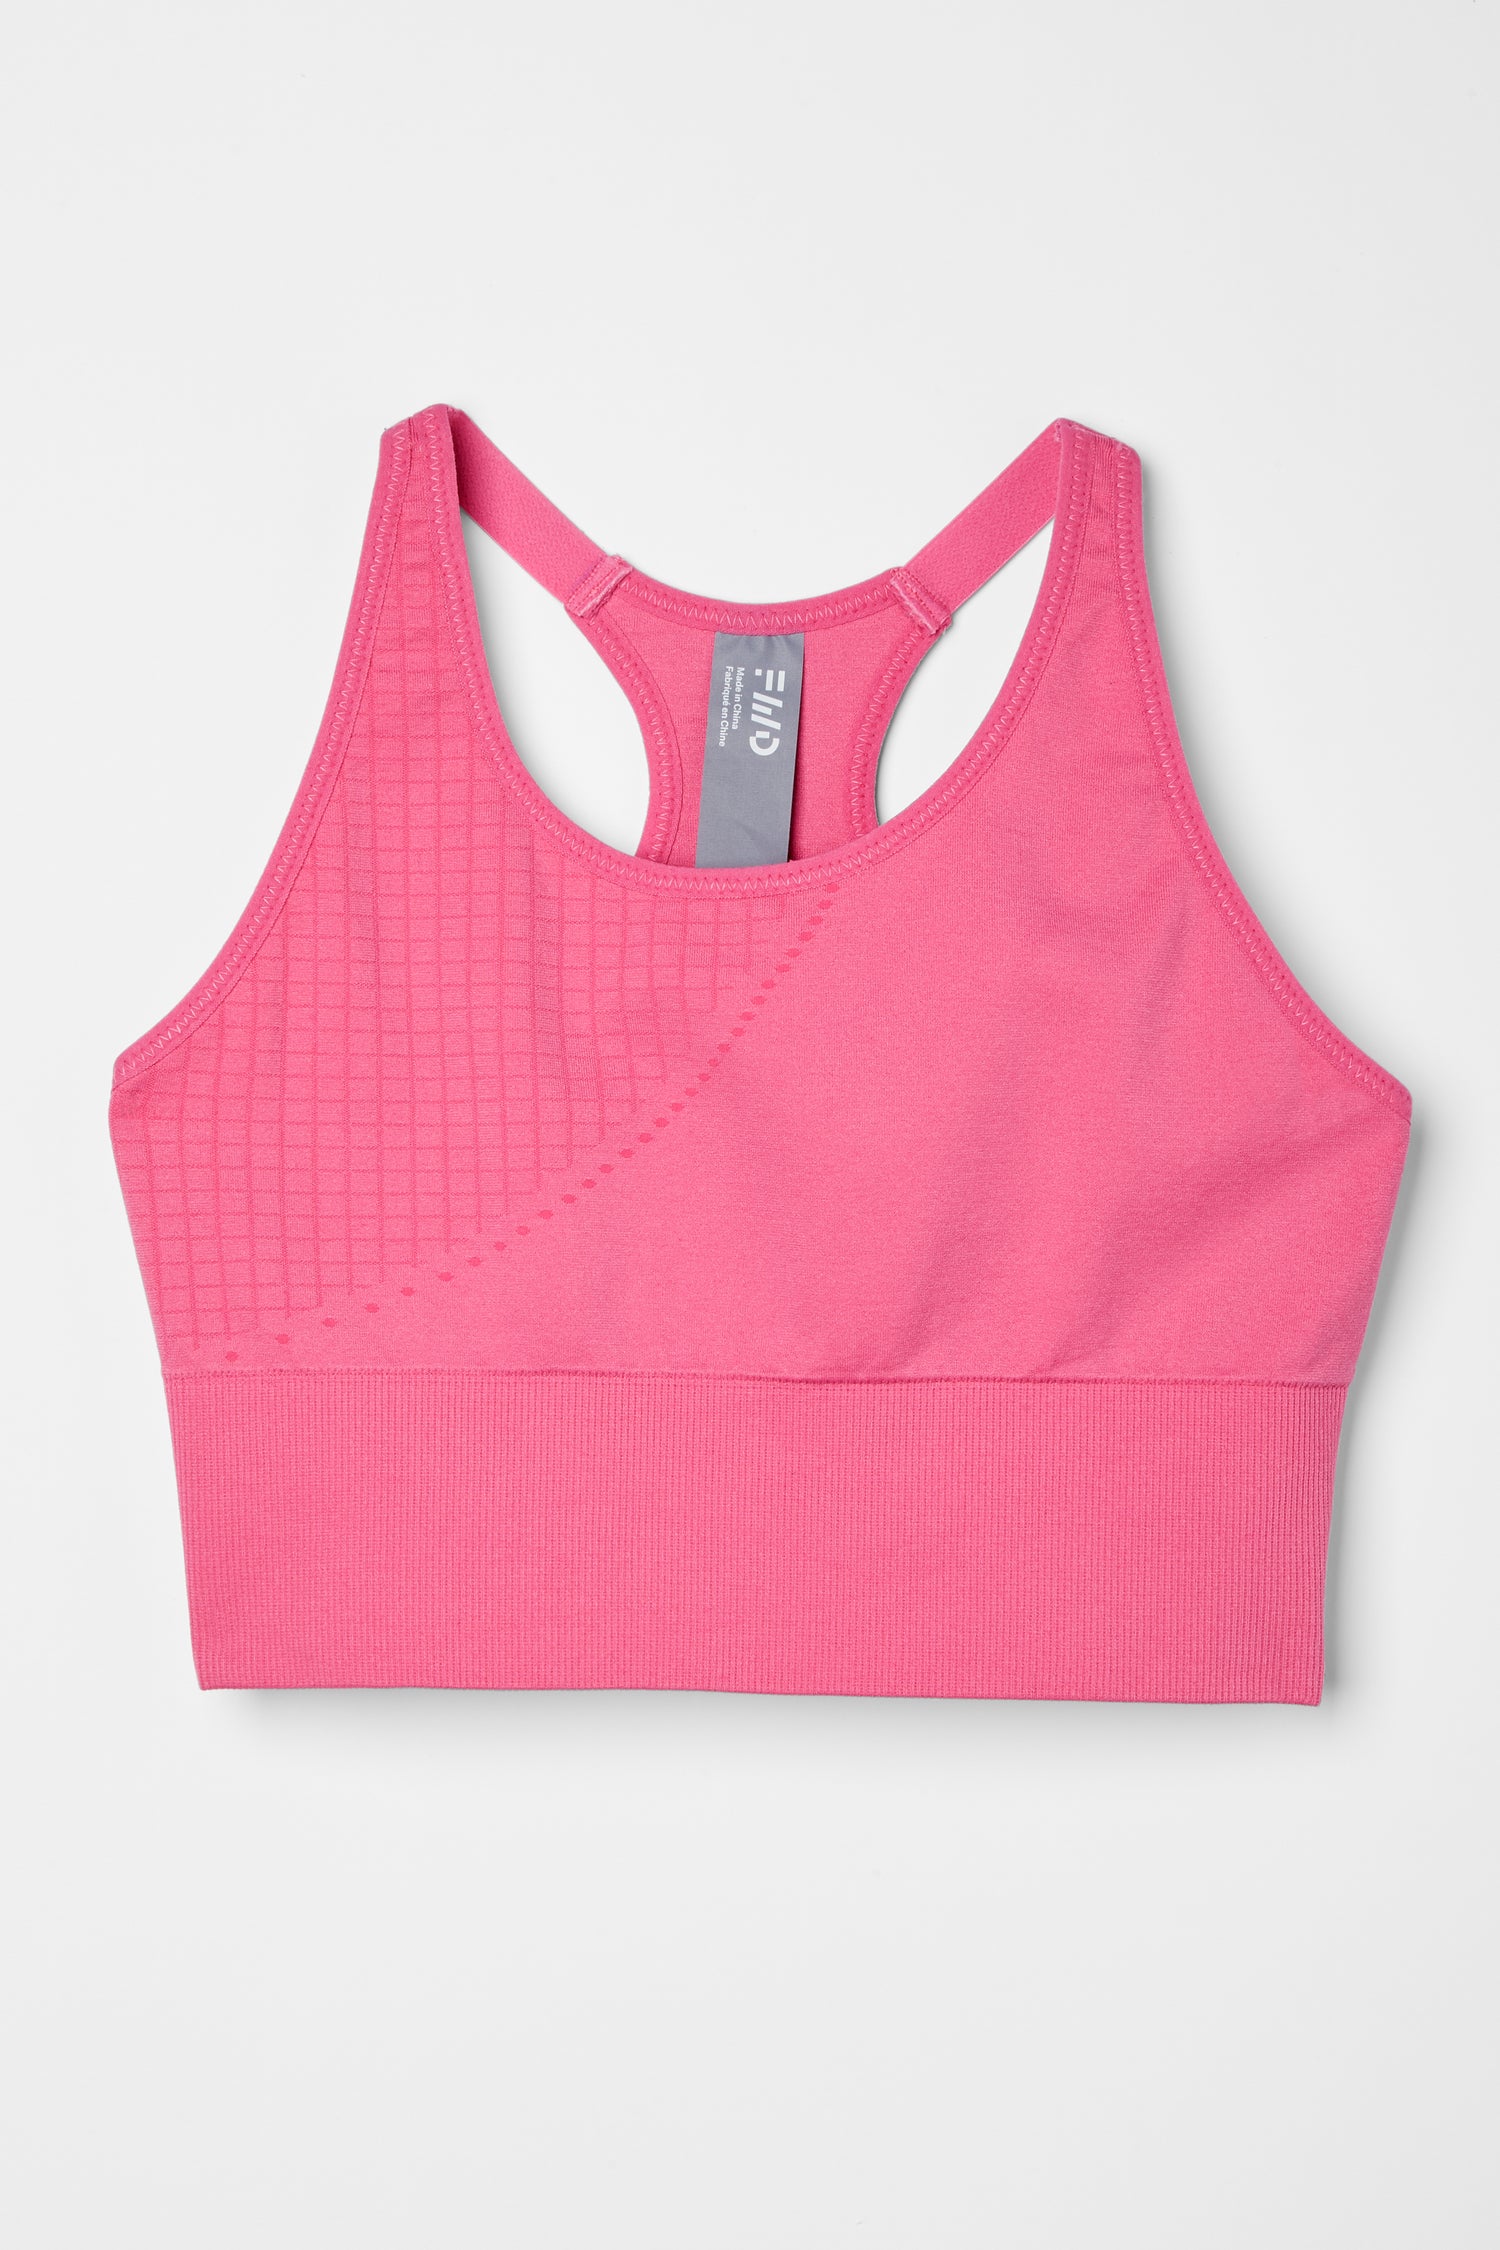 $12 for 2 Seamless Sports Bras from Superfit Knitting Mills (a $32 Value) 